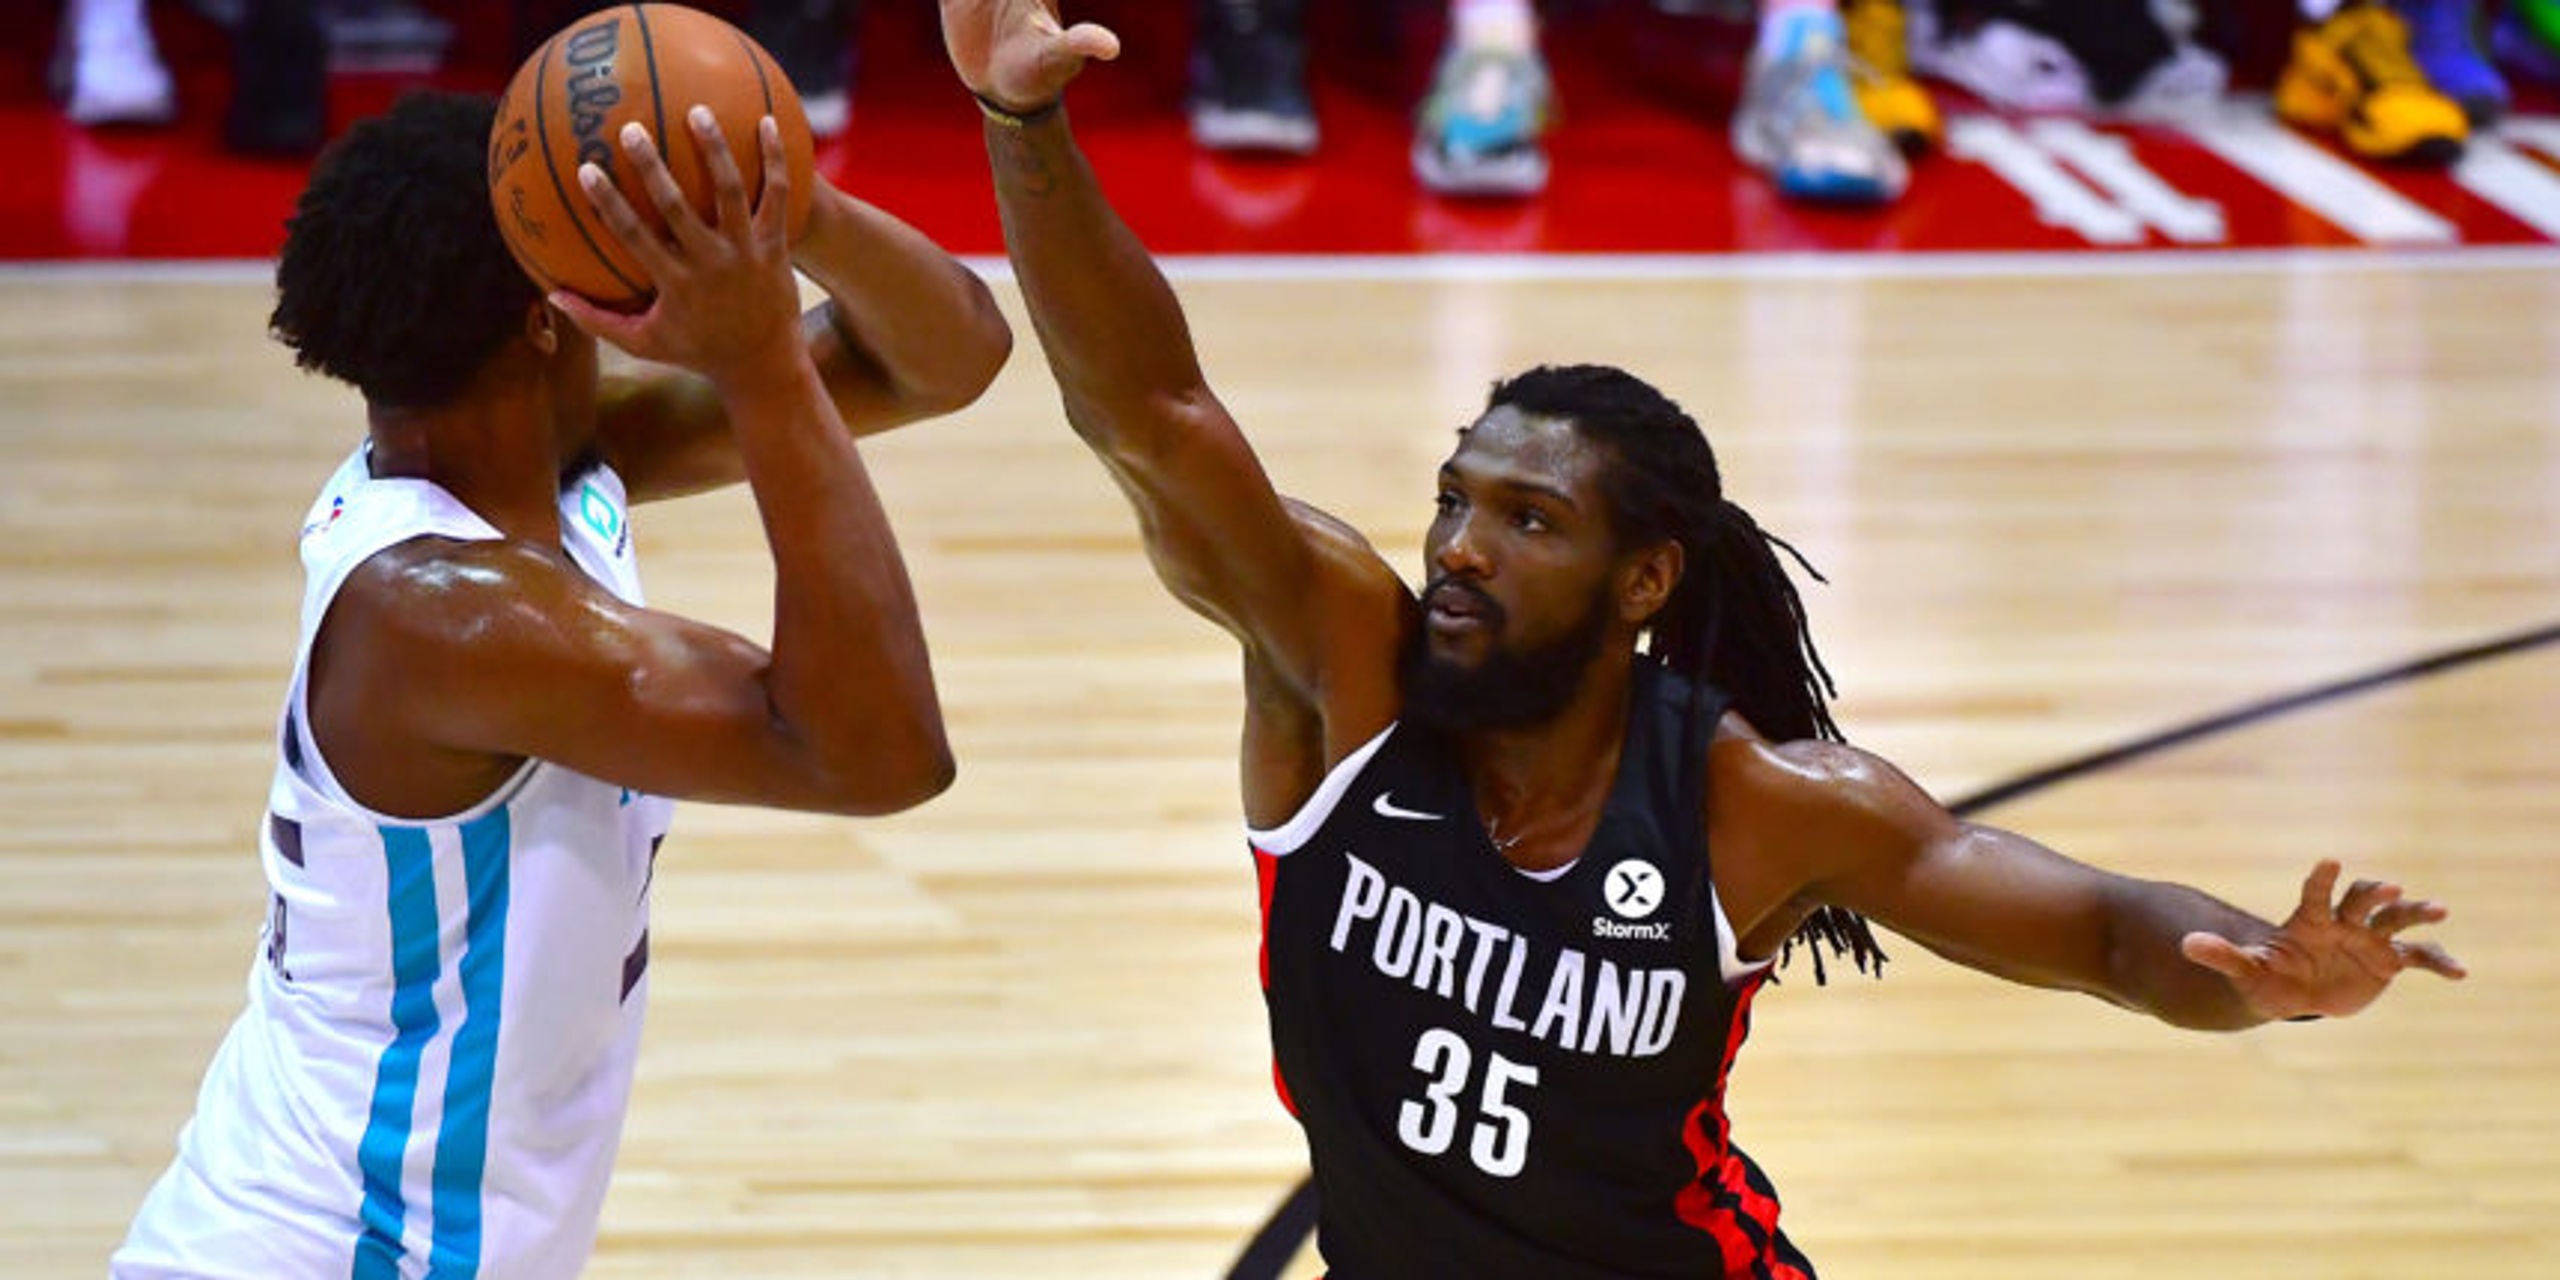 Report: Kenneth Faried to workout for Lakers this week